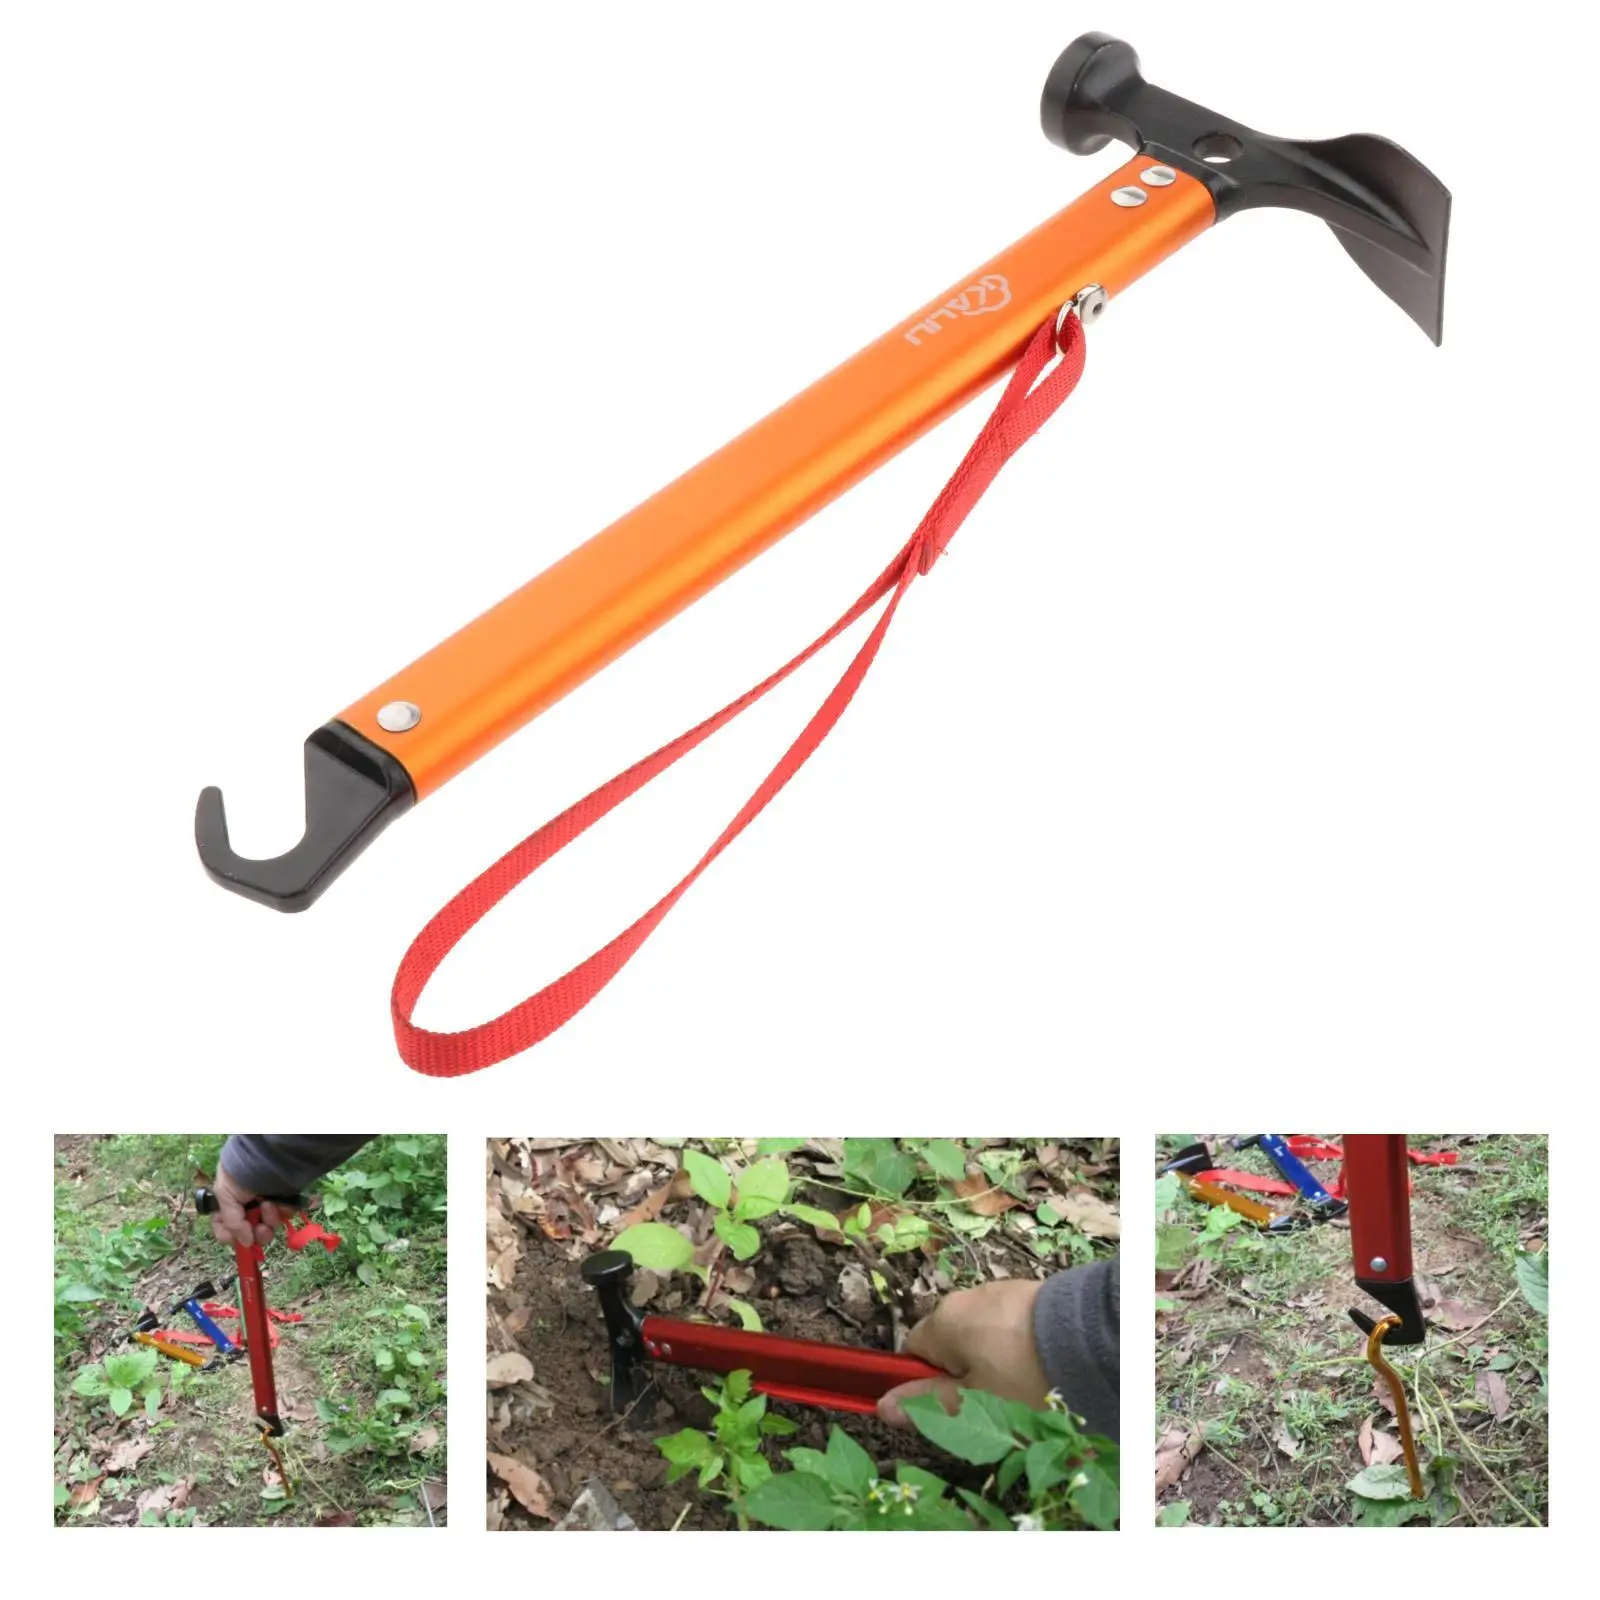 2 in 1 Multi-Function Portable Tent Mallet Peg Remover Driver Hammer Lightweight